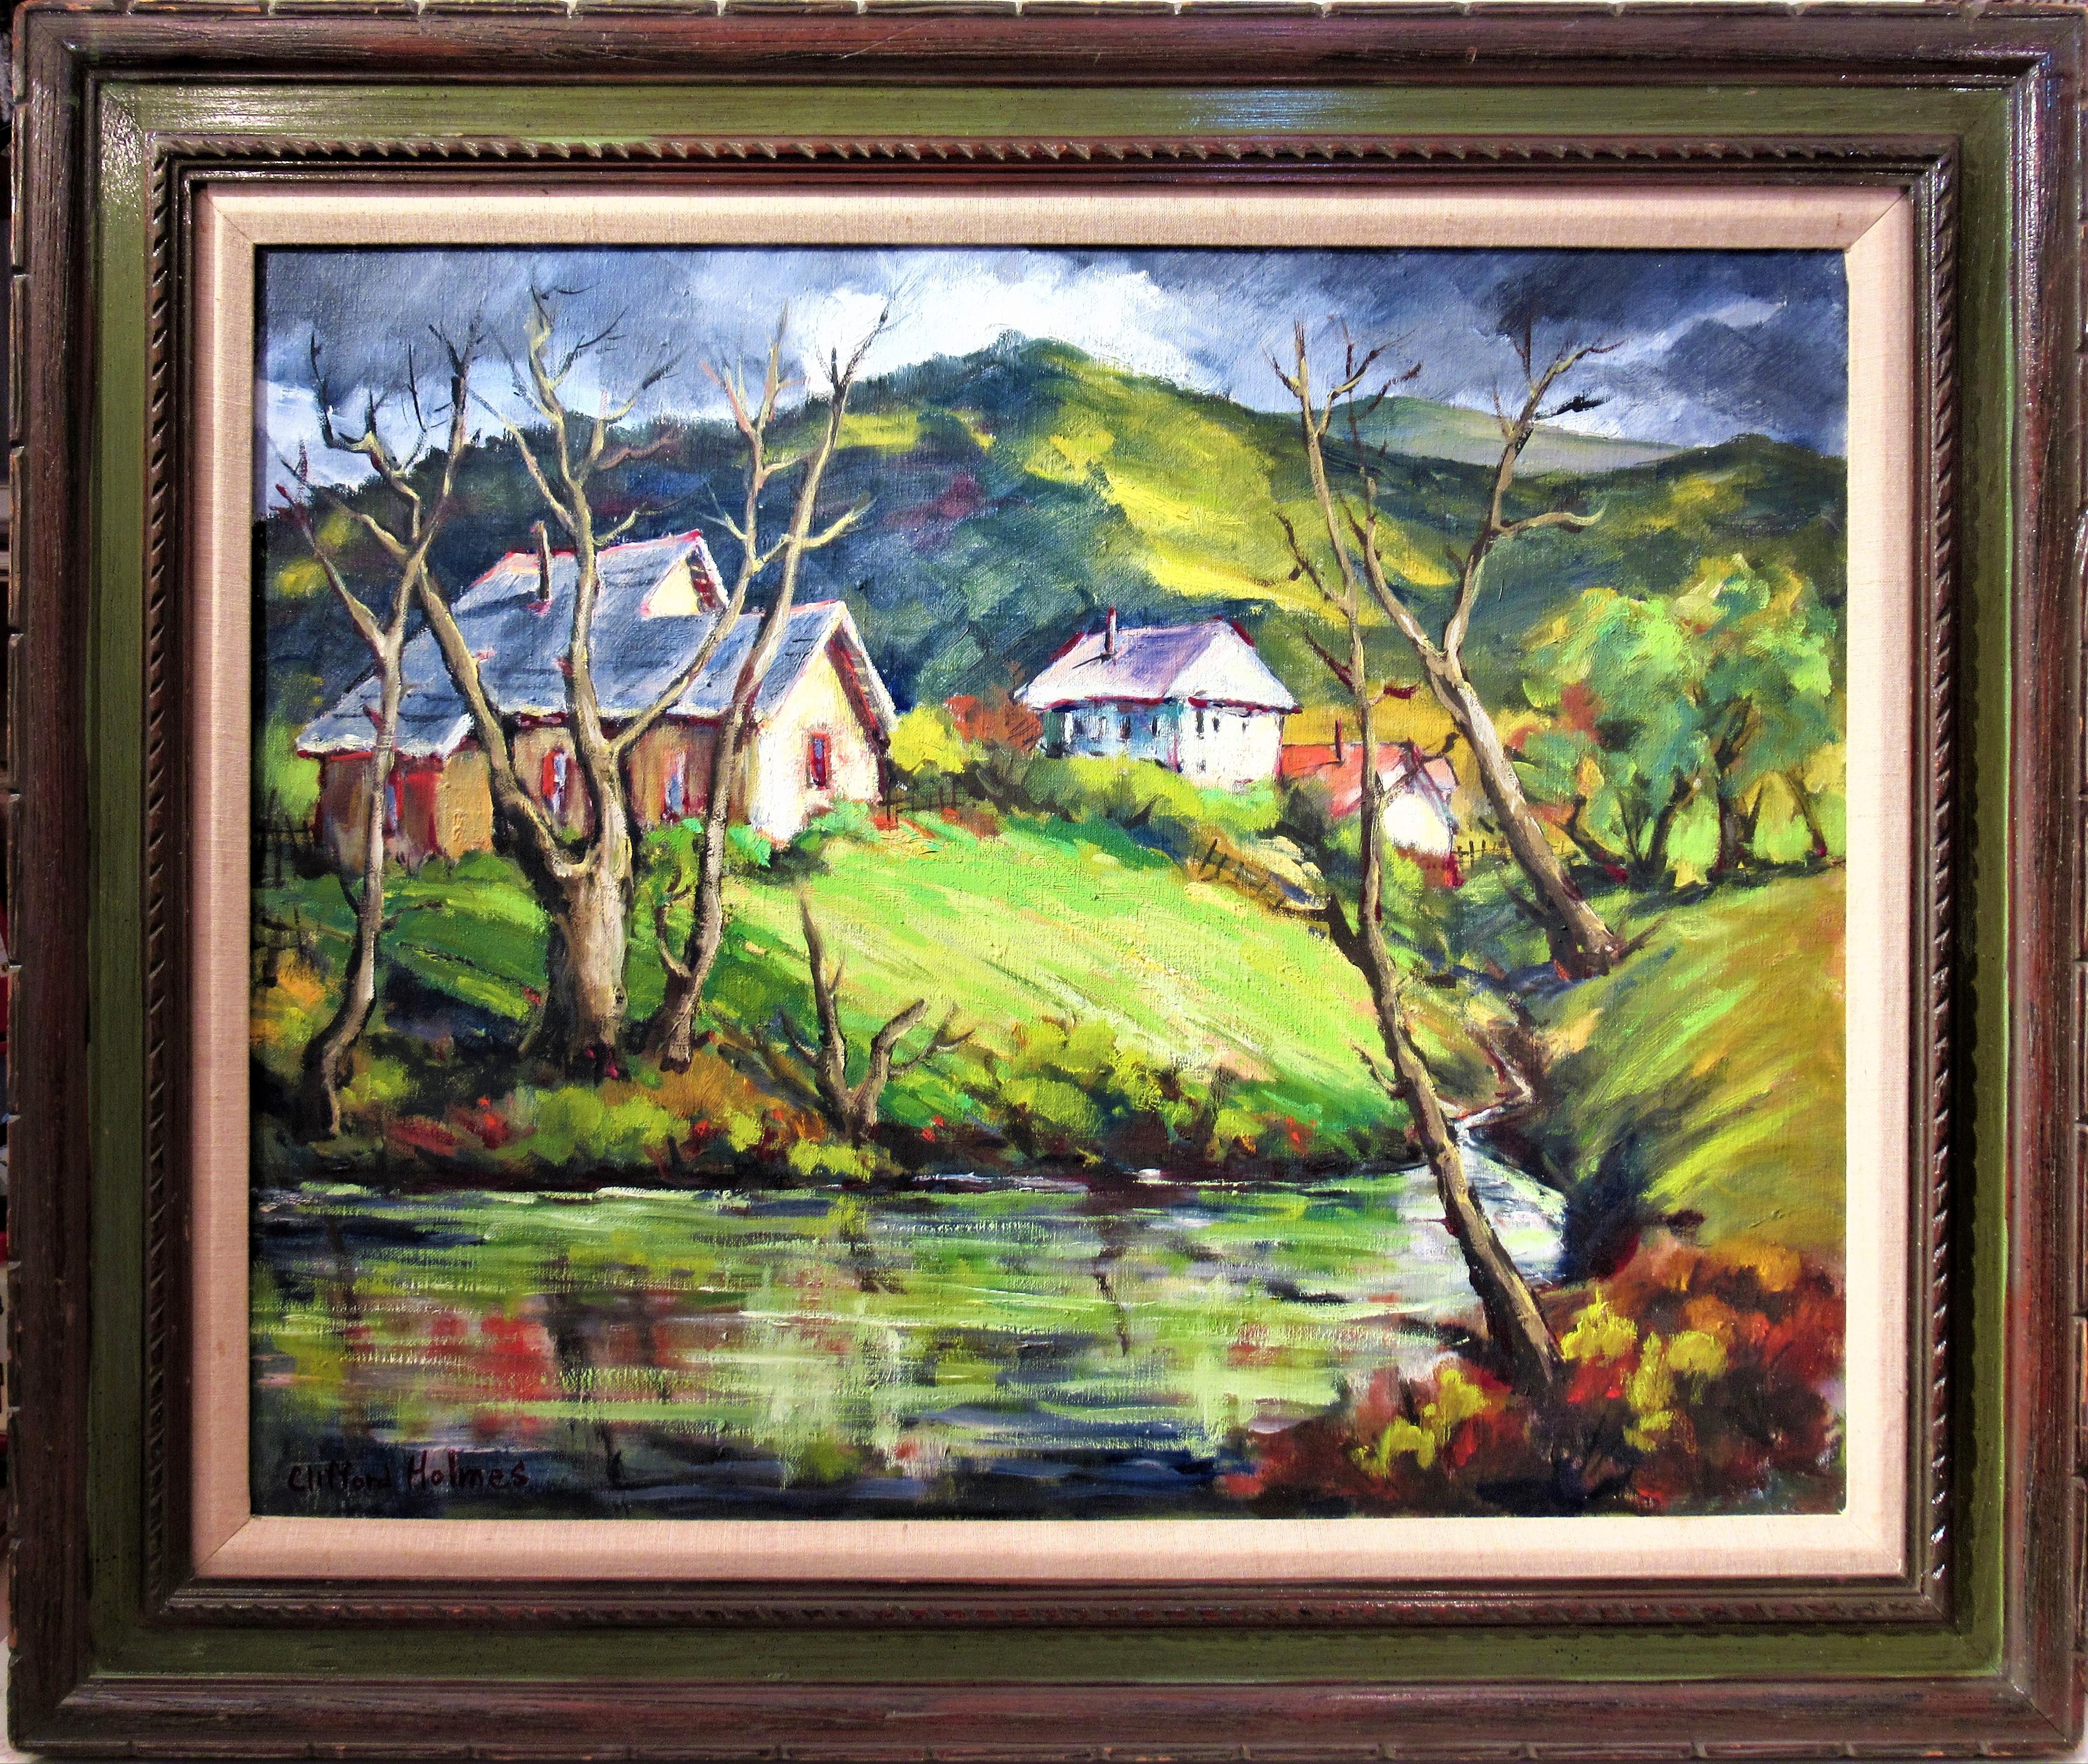 Clifford Holmes Figurative Painting - Landscape with Houses and Pond, California